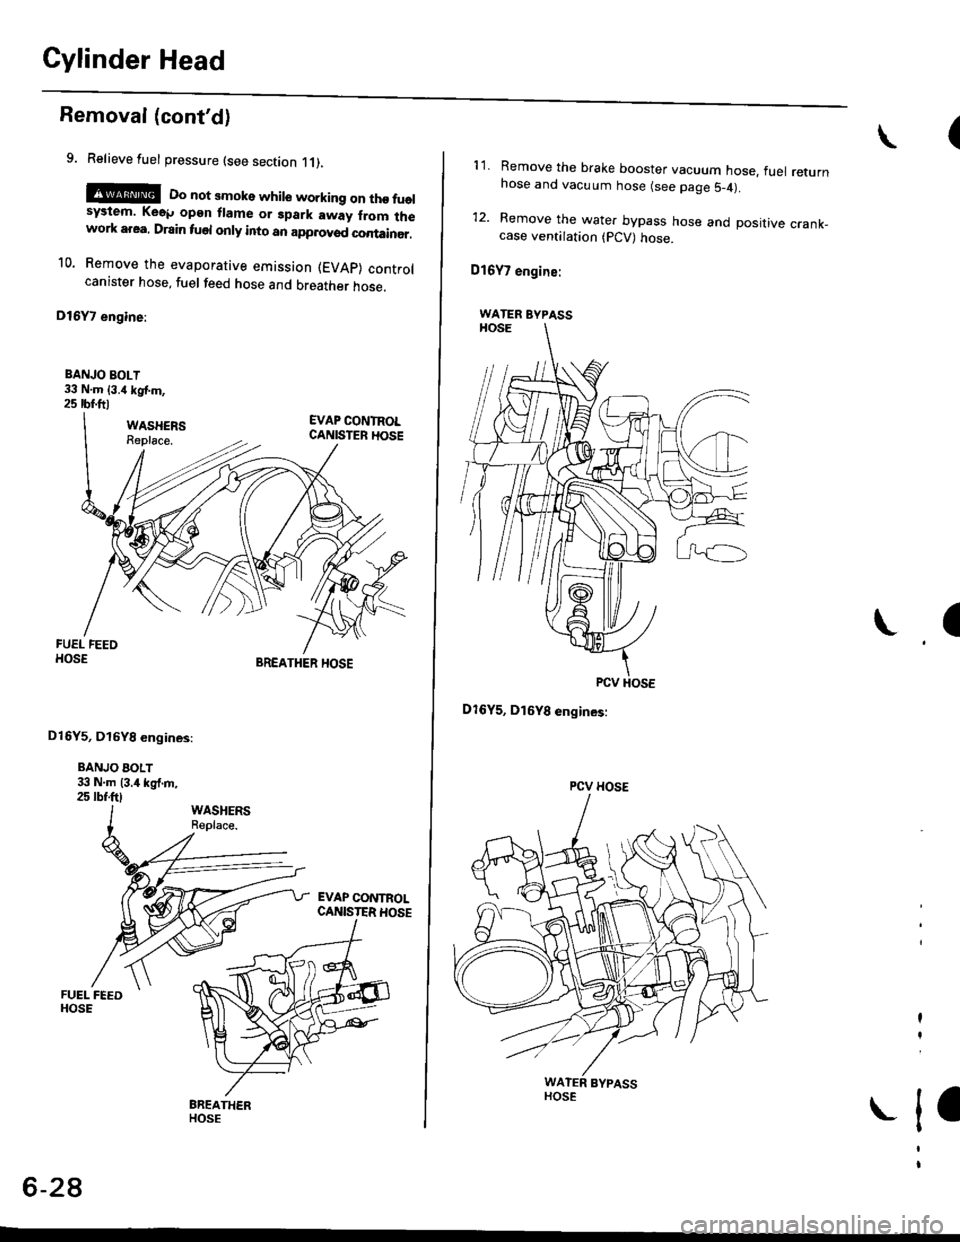 HONDA CIVIC 1999 6.G Workshop Manual Cylinder Head
Removal (contd)
9. Relieve fuel pressure (see section 11),
E@E Do not smoke while working on tho fuelsystem. Ke6p opgn flame or gpark away from lhework area, Drain fuel only into an app